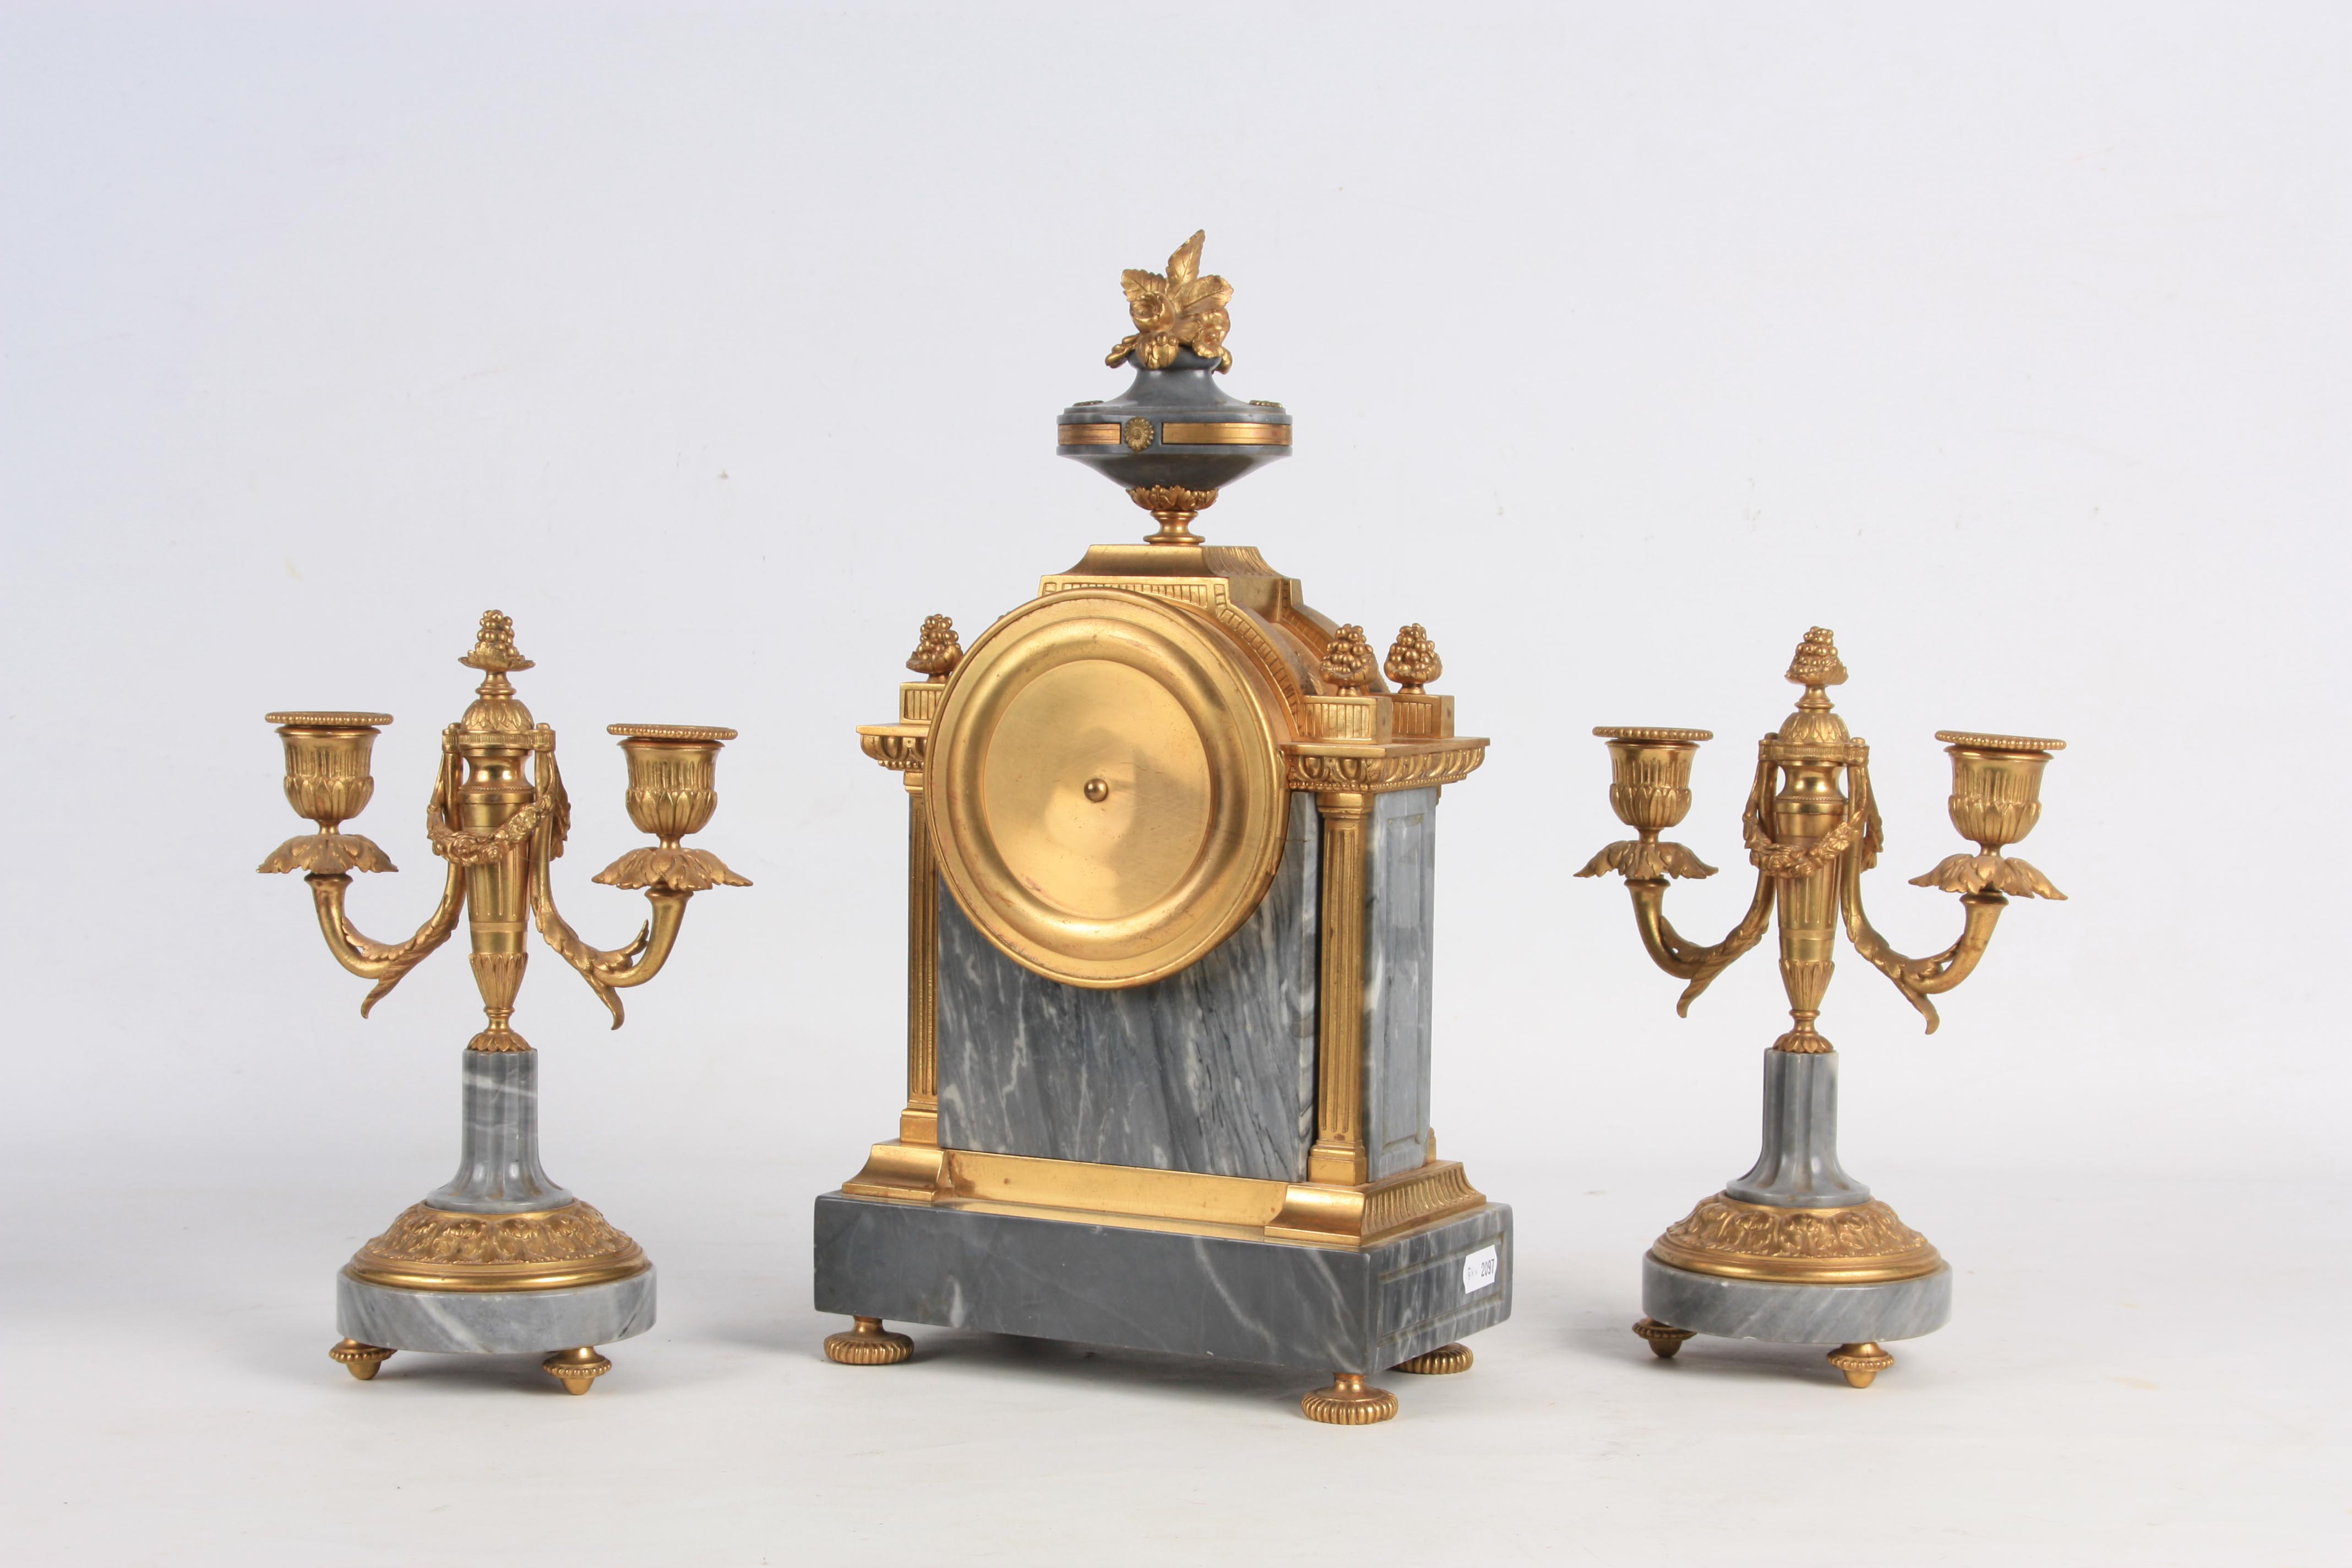 LEMERLE-CHARPENTIER & CIE, PARIS A MID 19TH CENTURY FRENCH MARBLE AND ORMOLU CLOCK GARNITURE the - Image 8 of 14